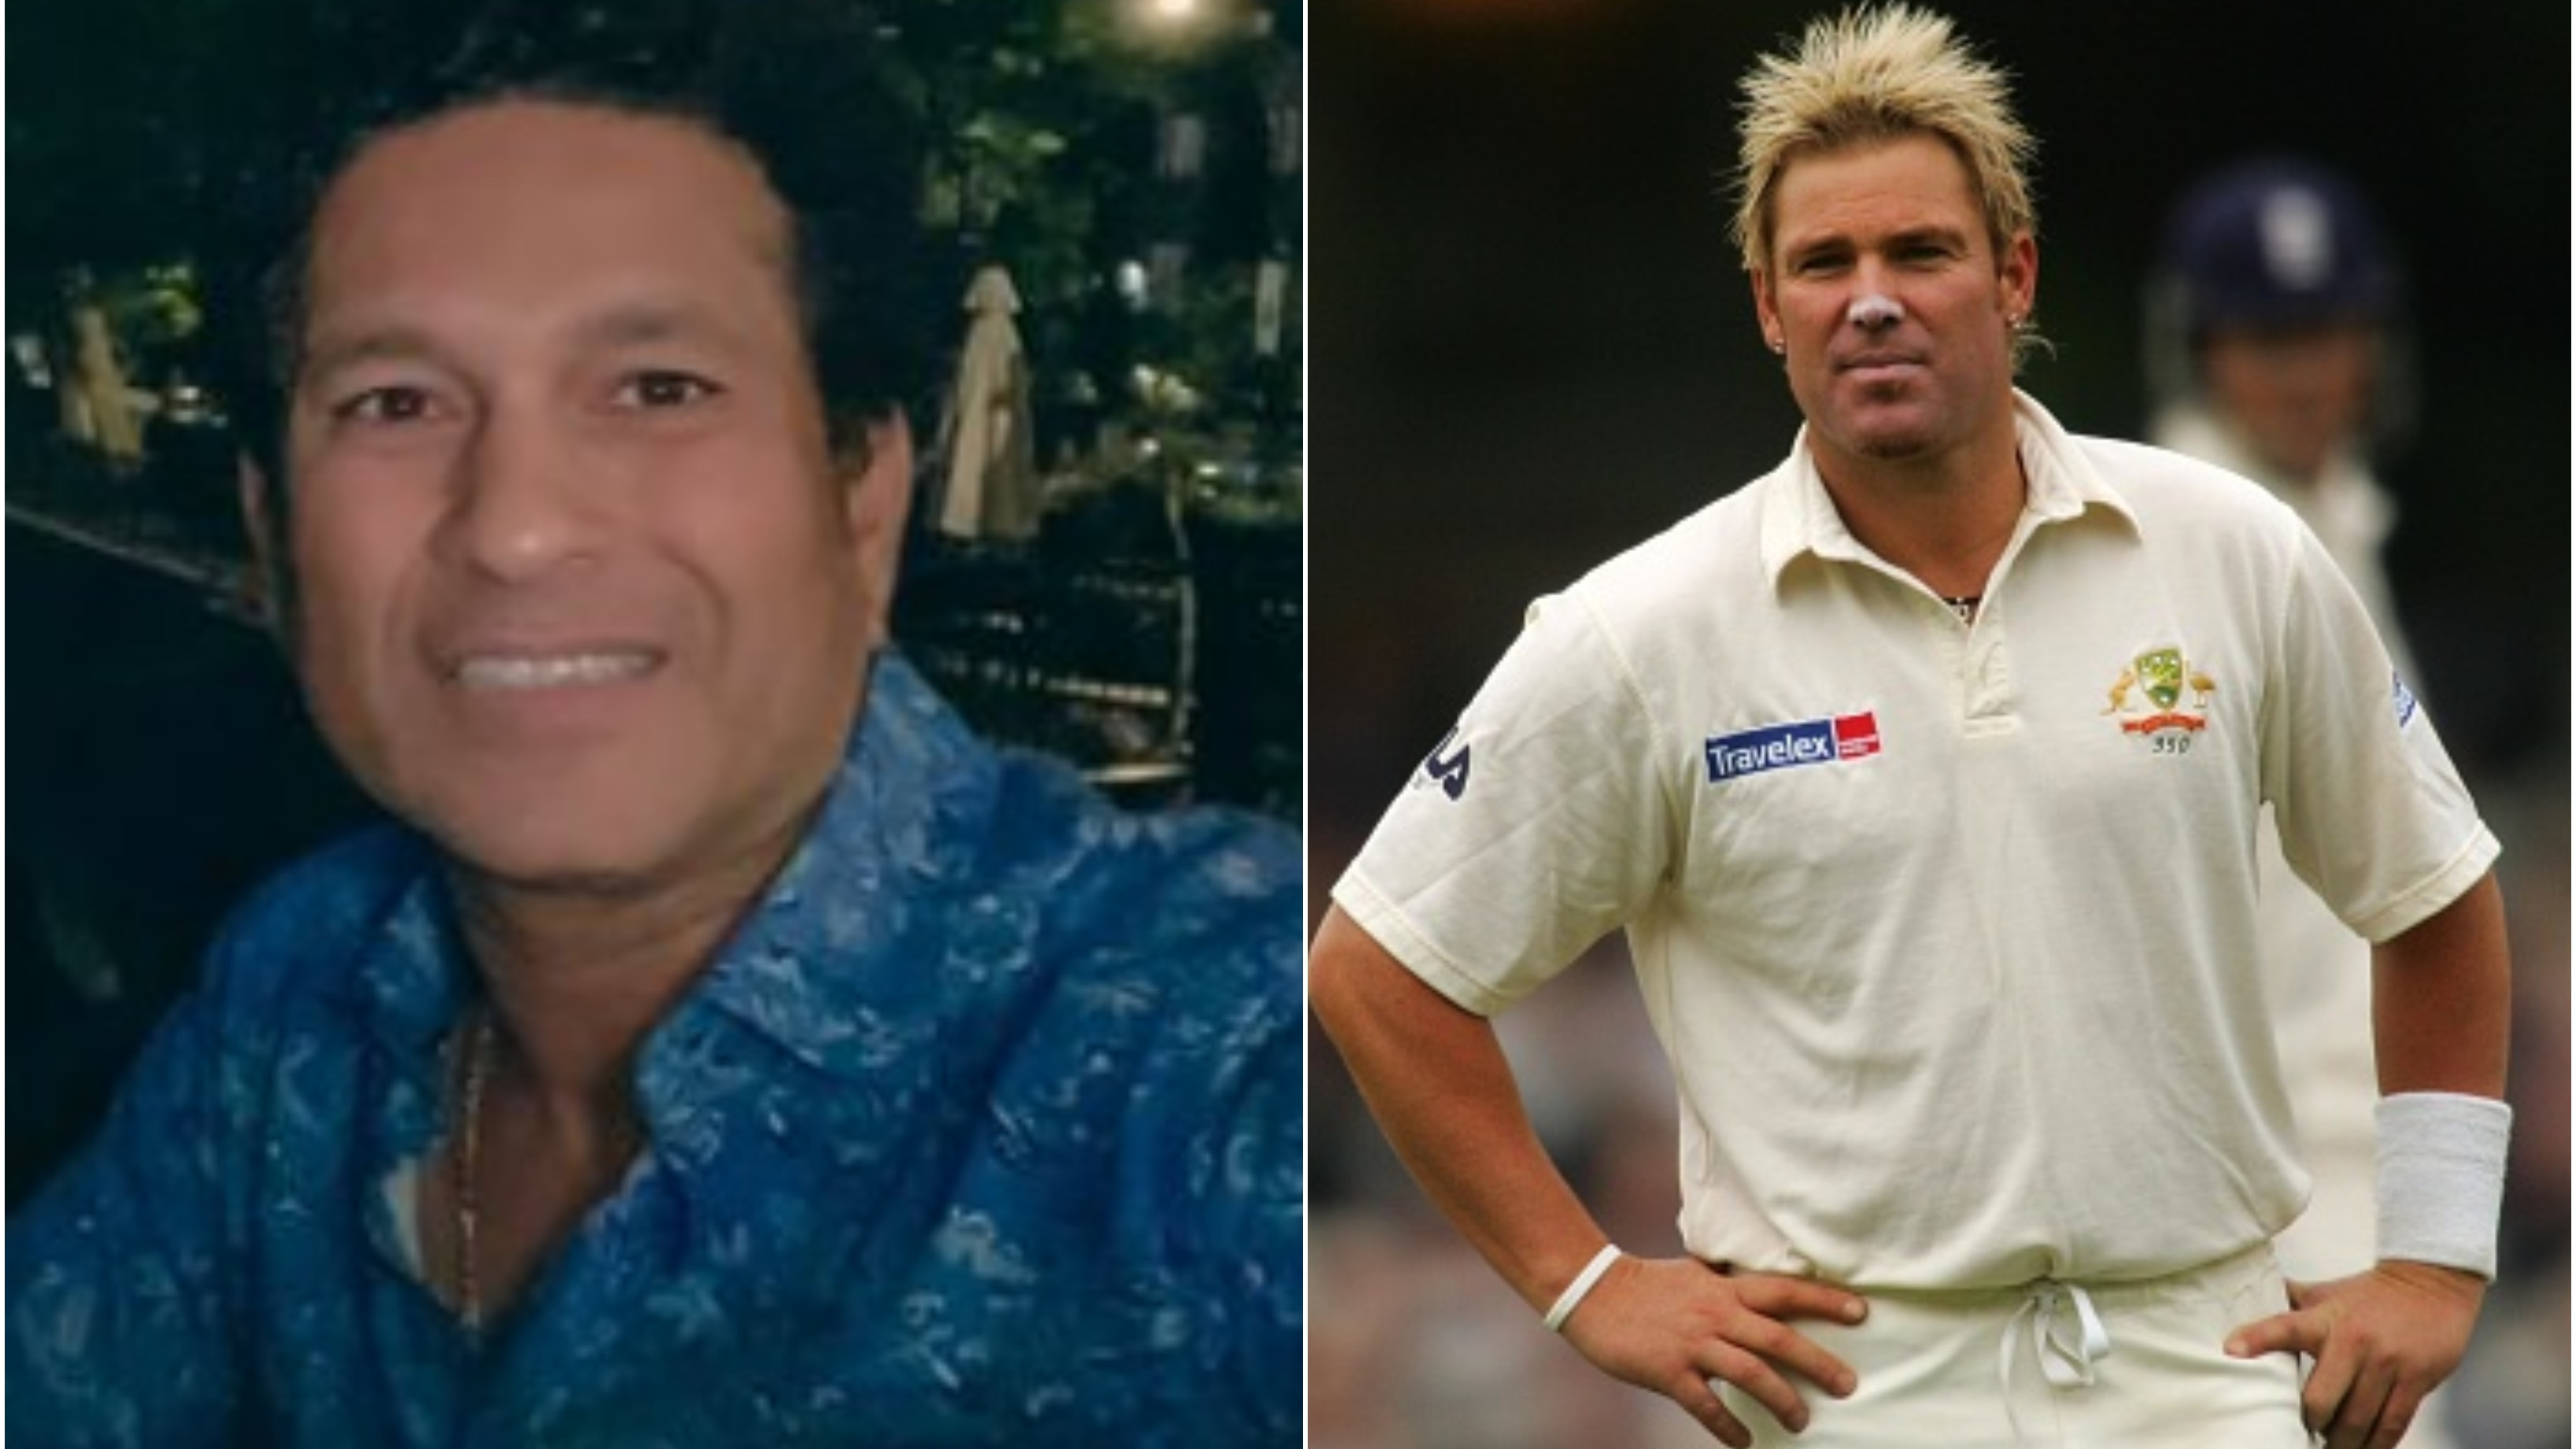 Sachin Tendulkar remembers Shane Warne while dining out in London, shares post on Instagram